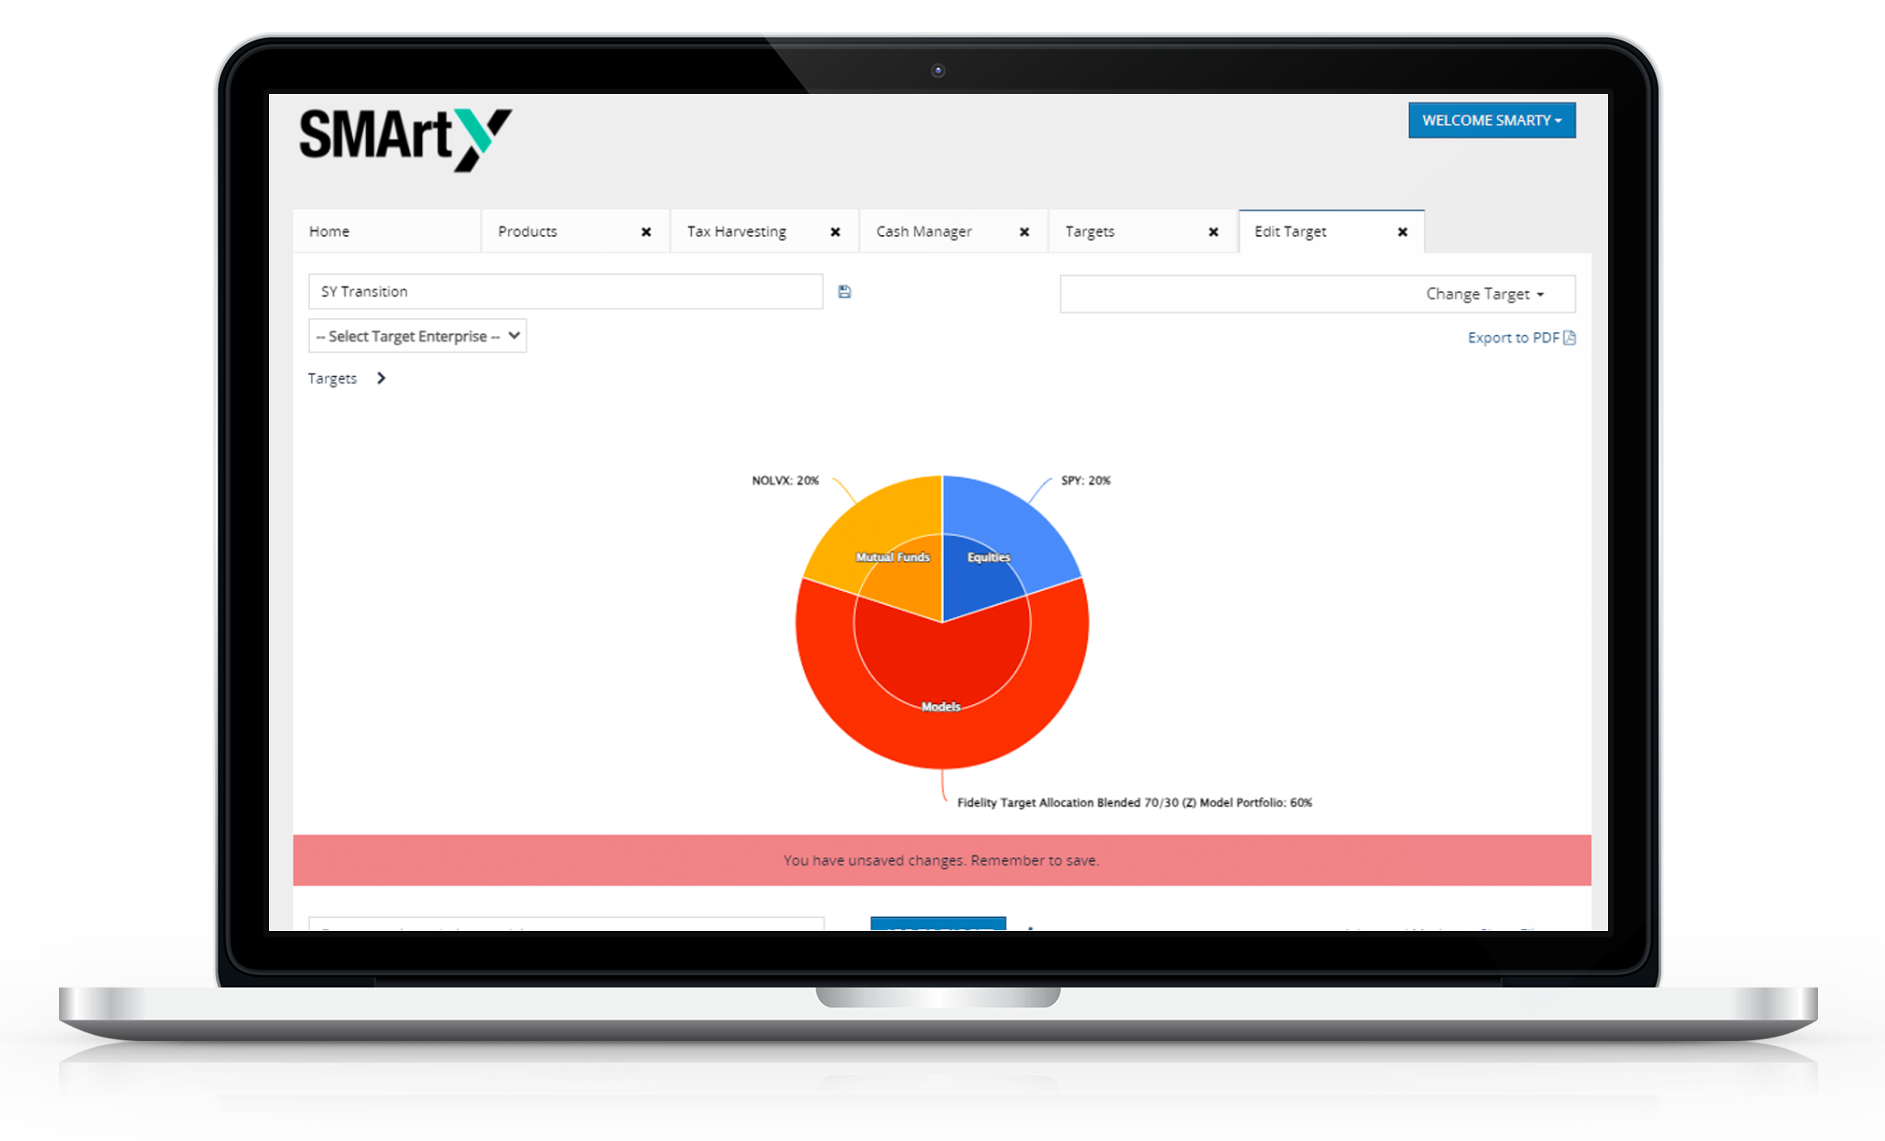 SMArtY is the only manager-sponsored, no-fee strategist platform built to let advisors harness powerful UMA capabilities, tax-focused investing, and cost-effective investment operations solutions without a hefty price tag.<br />
